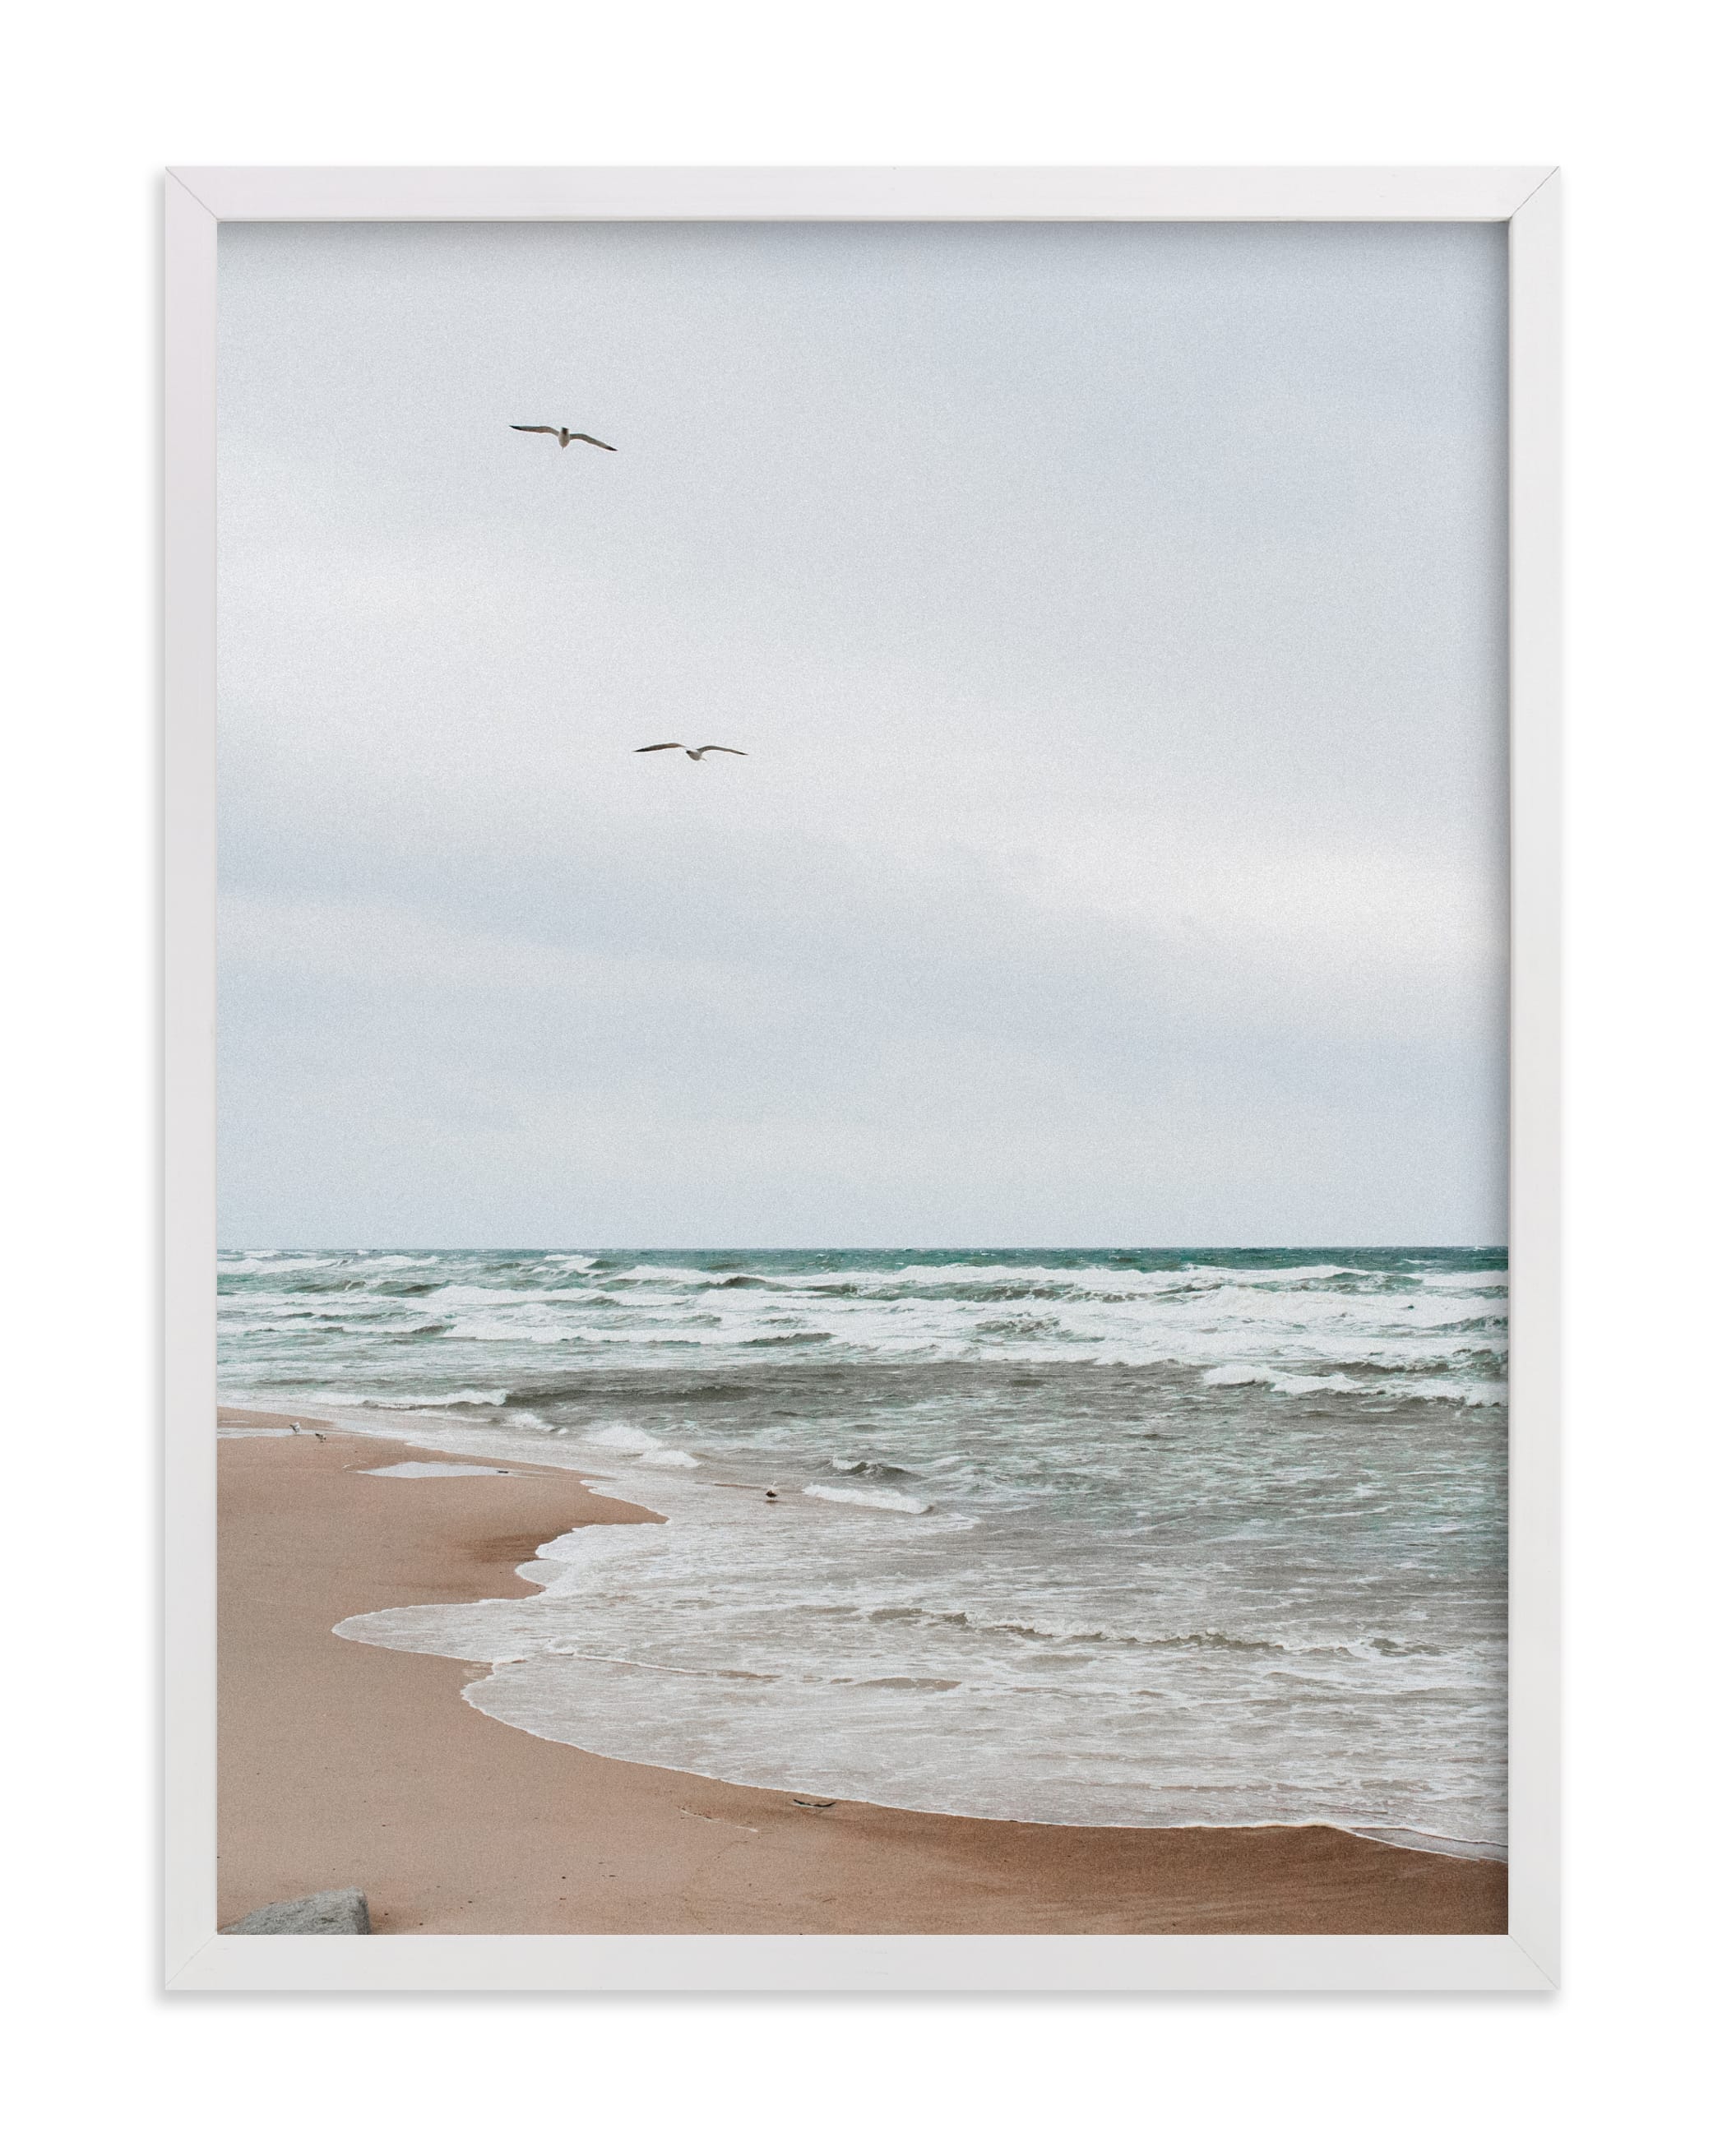 "White wave and bird" by Lying on the grass in beautiful frame options and a variety of sizes.